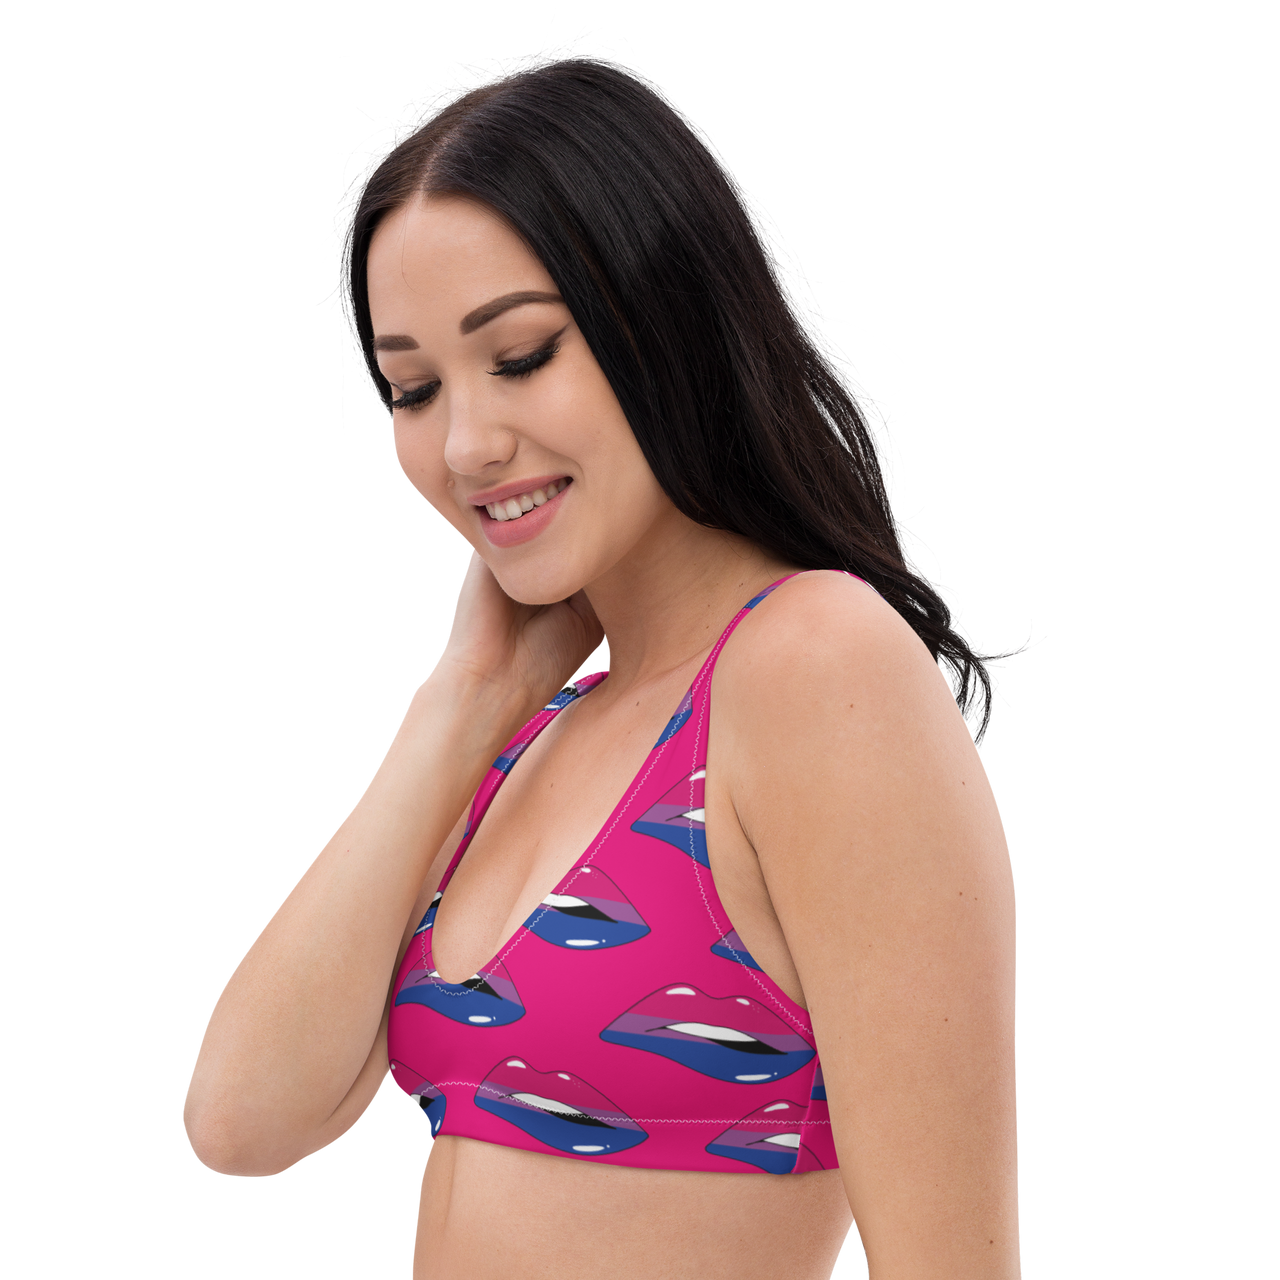 Bisexual Flag Kisses Padded Bikini Top for They/Them Him/Her - Pink SHAVA